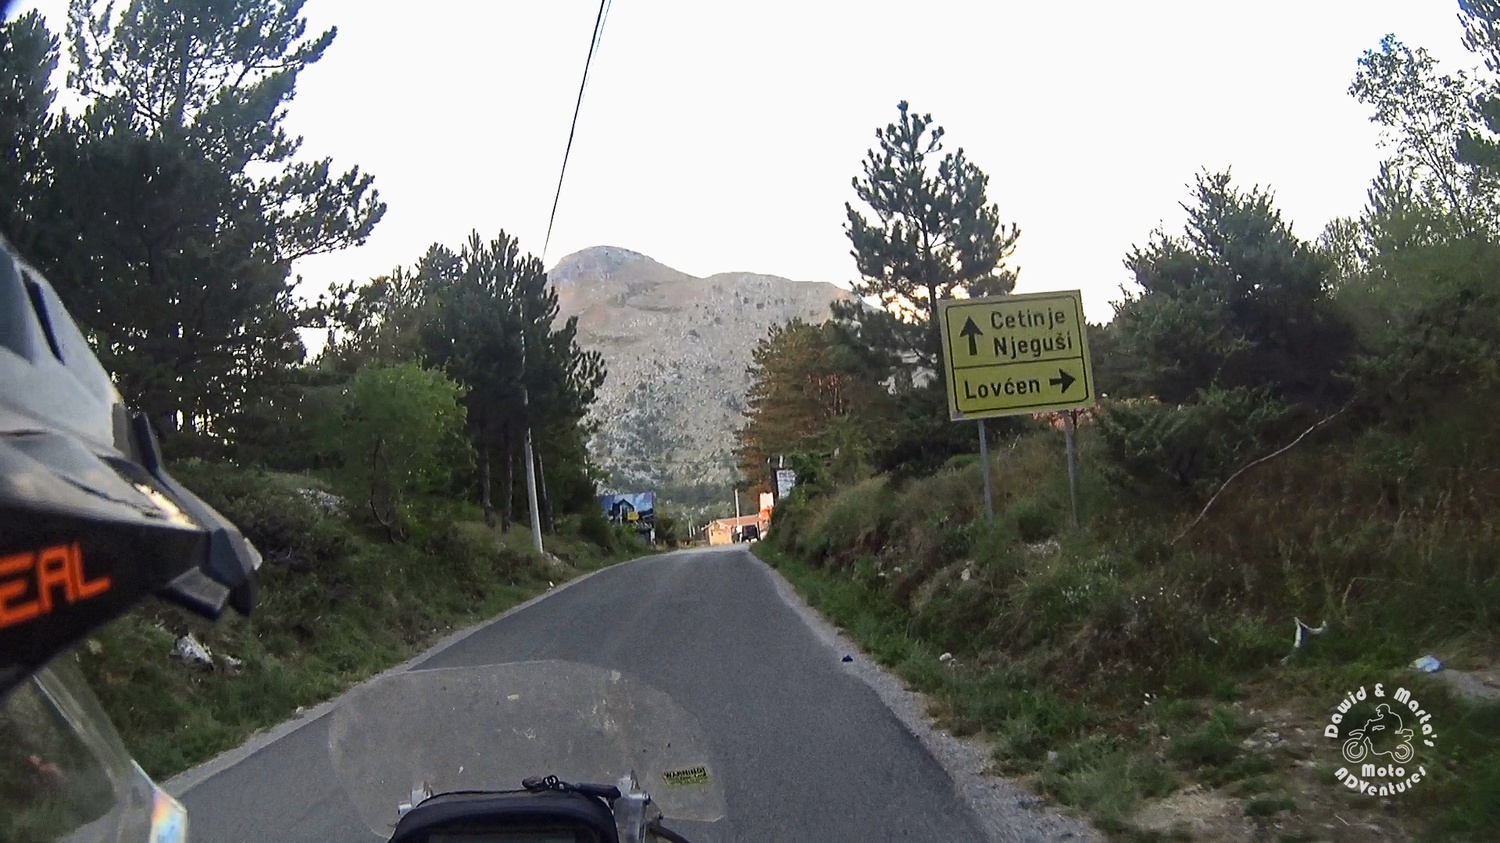 P1 road branches into Lovcen National Park